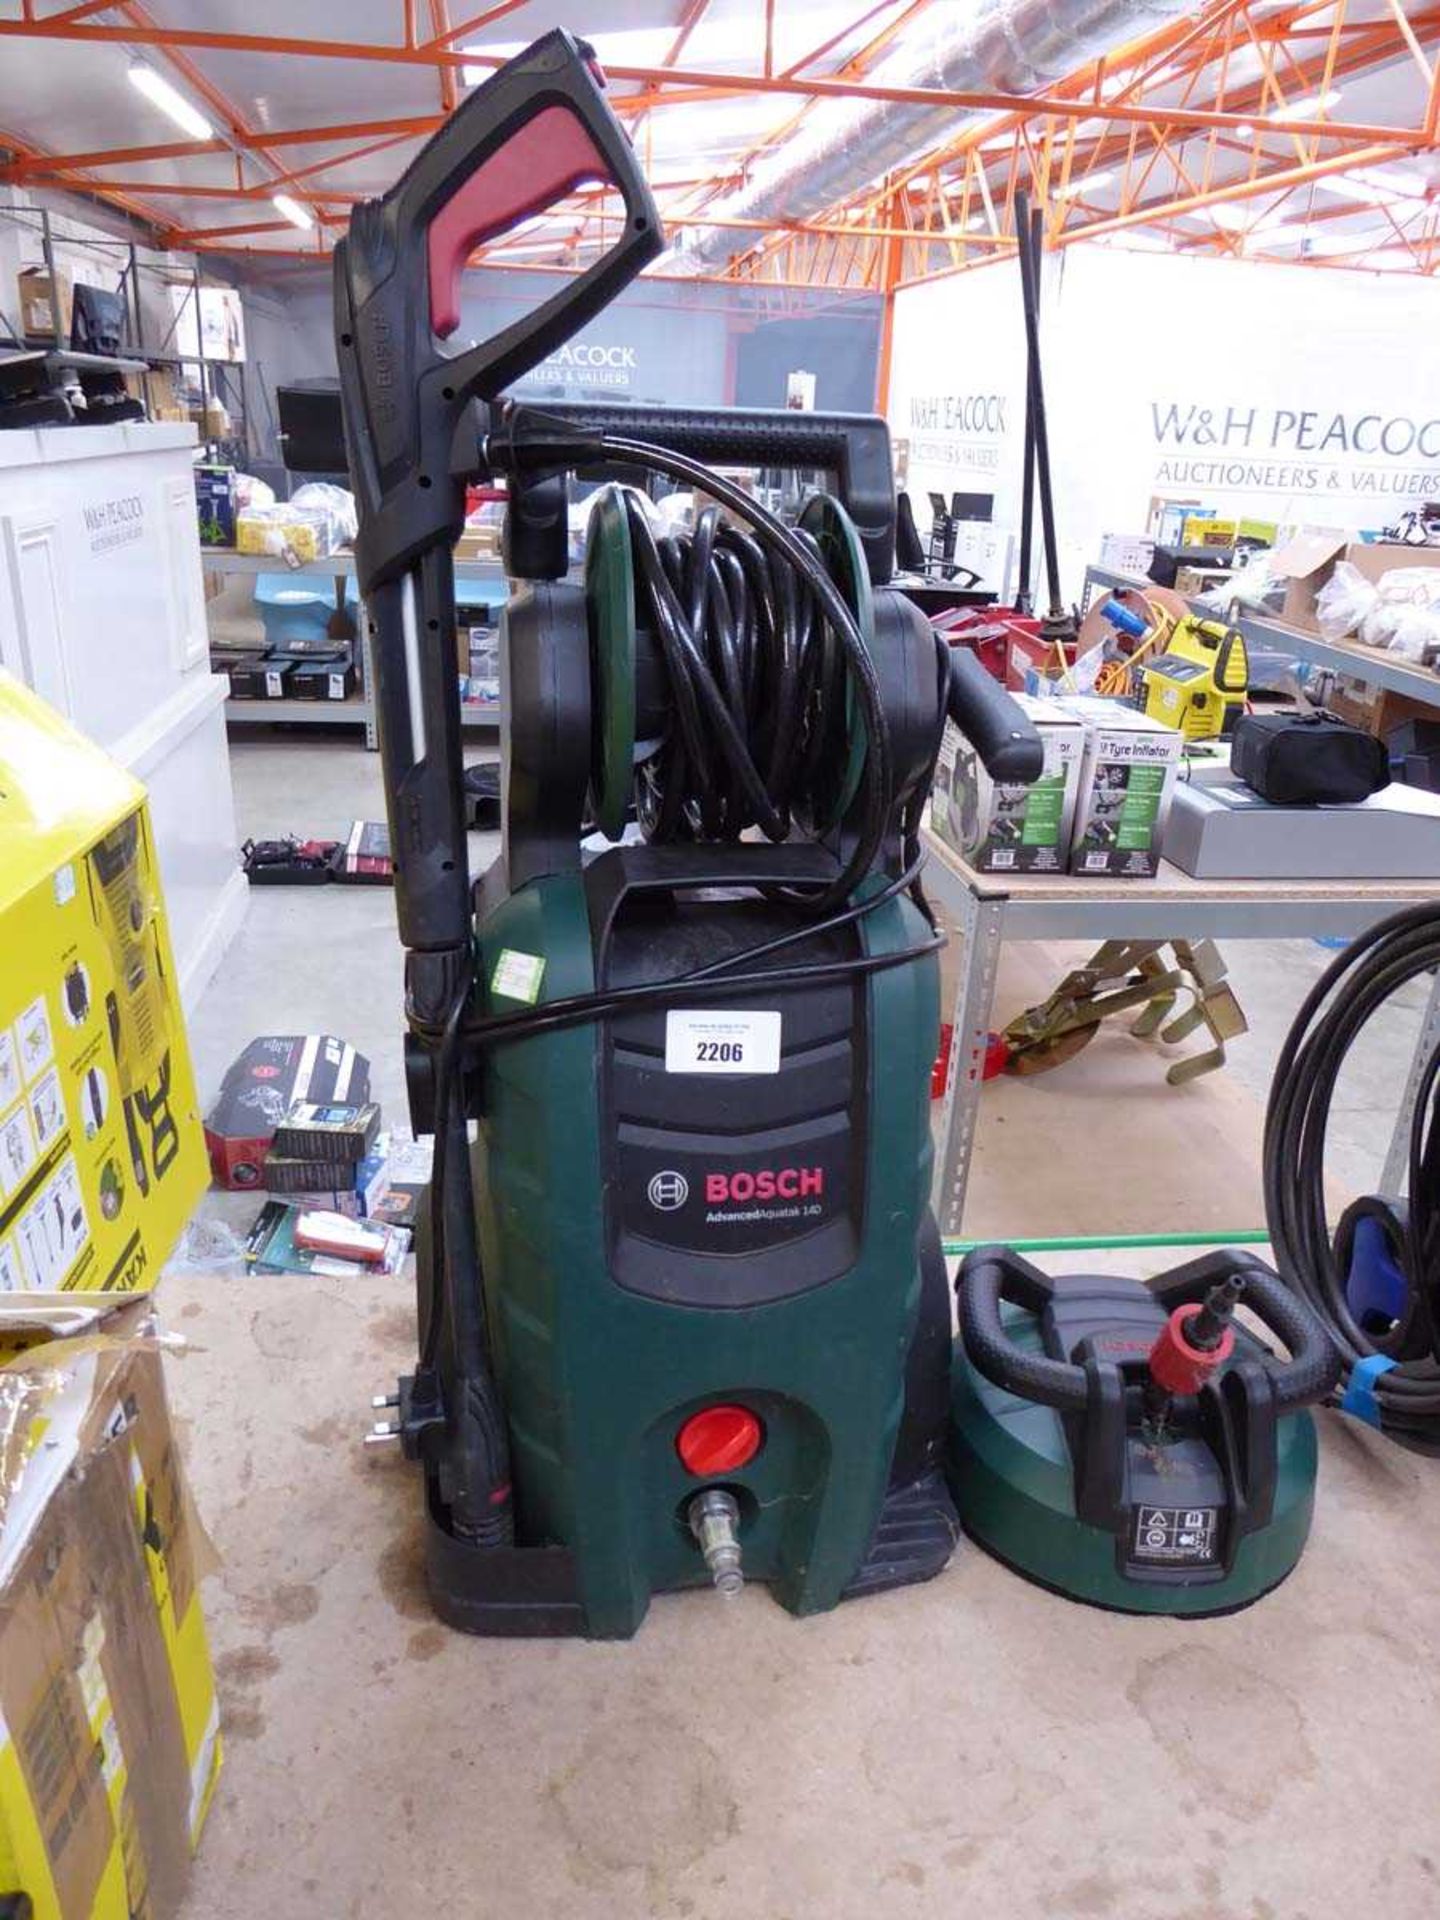 +VAT Bosch Advance Aquatak 140 electric pressure washer with patio cleaner and attachment